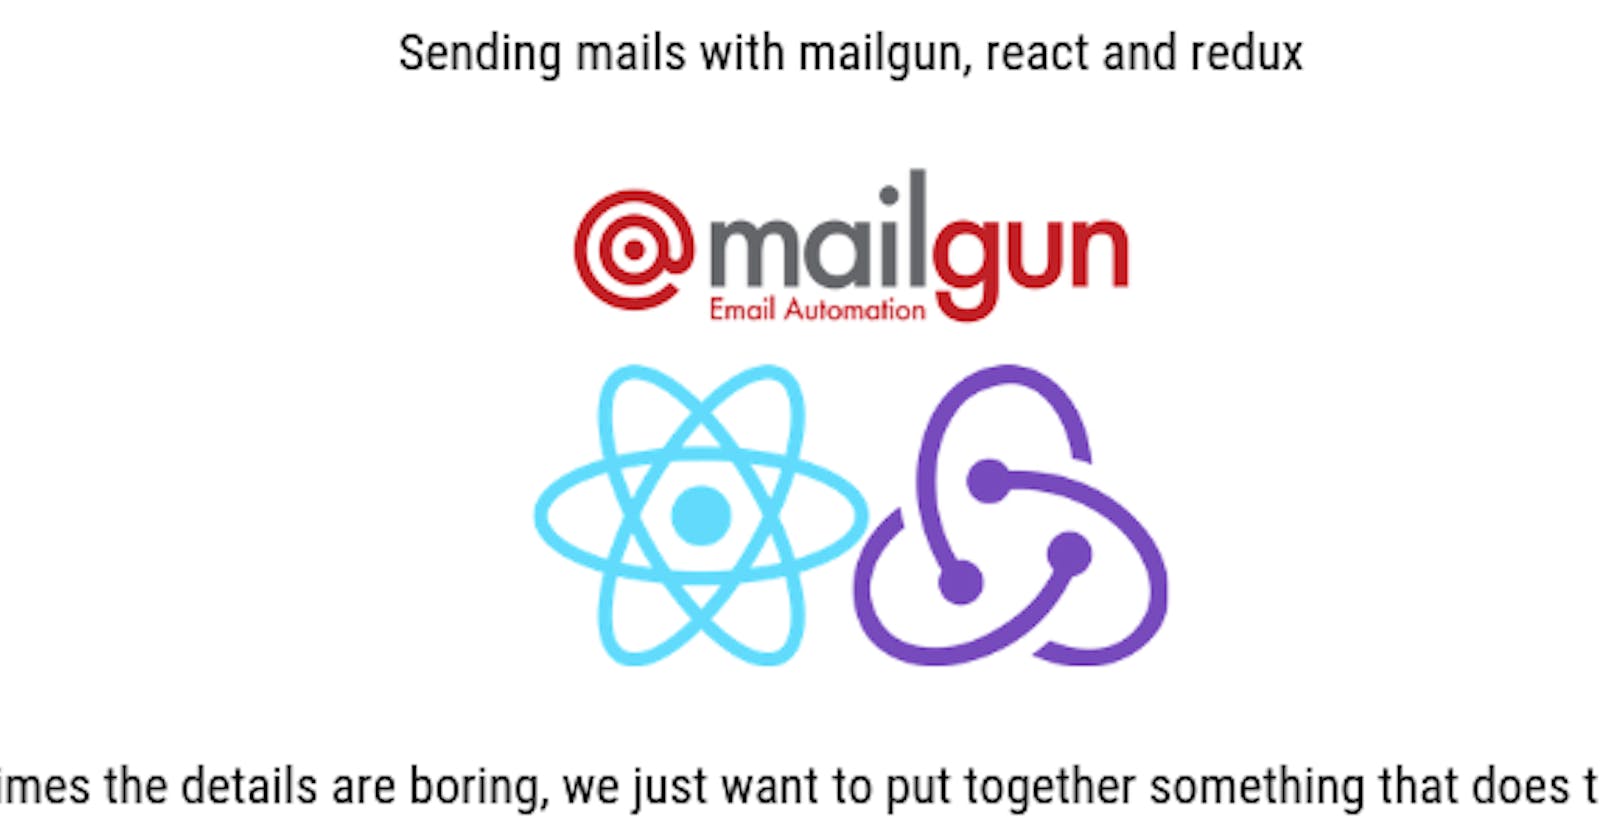 Send emails with React/Redux contact form using Mailgun Part 1